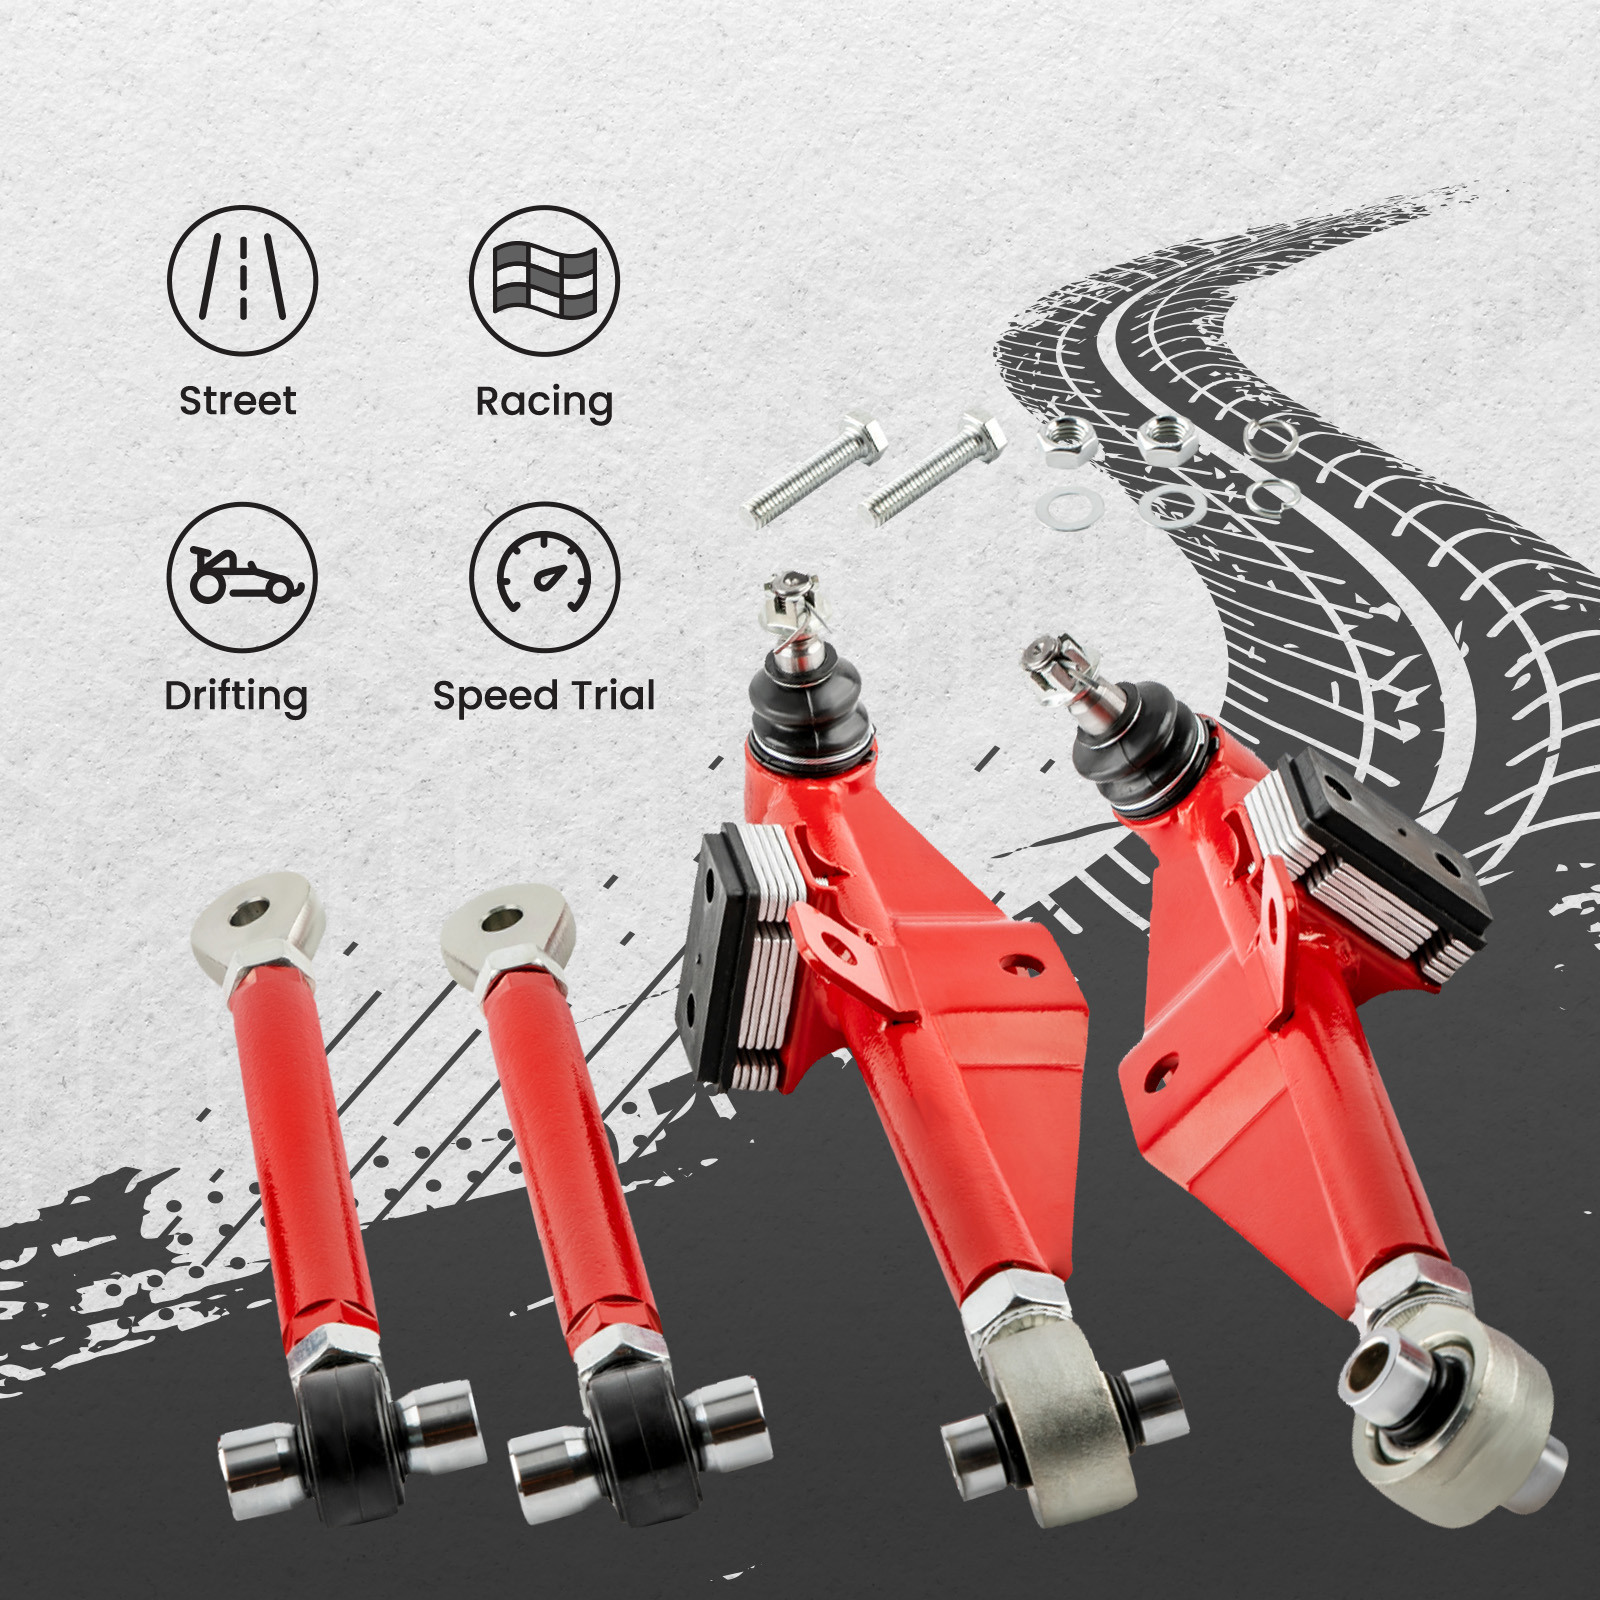 WHY CHOOSE OUR ADJUSTABLE CONTROL ARM?